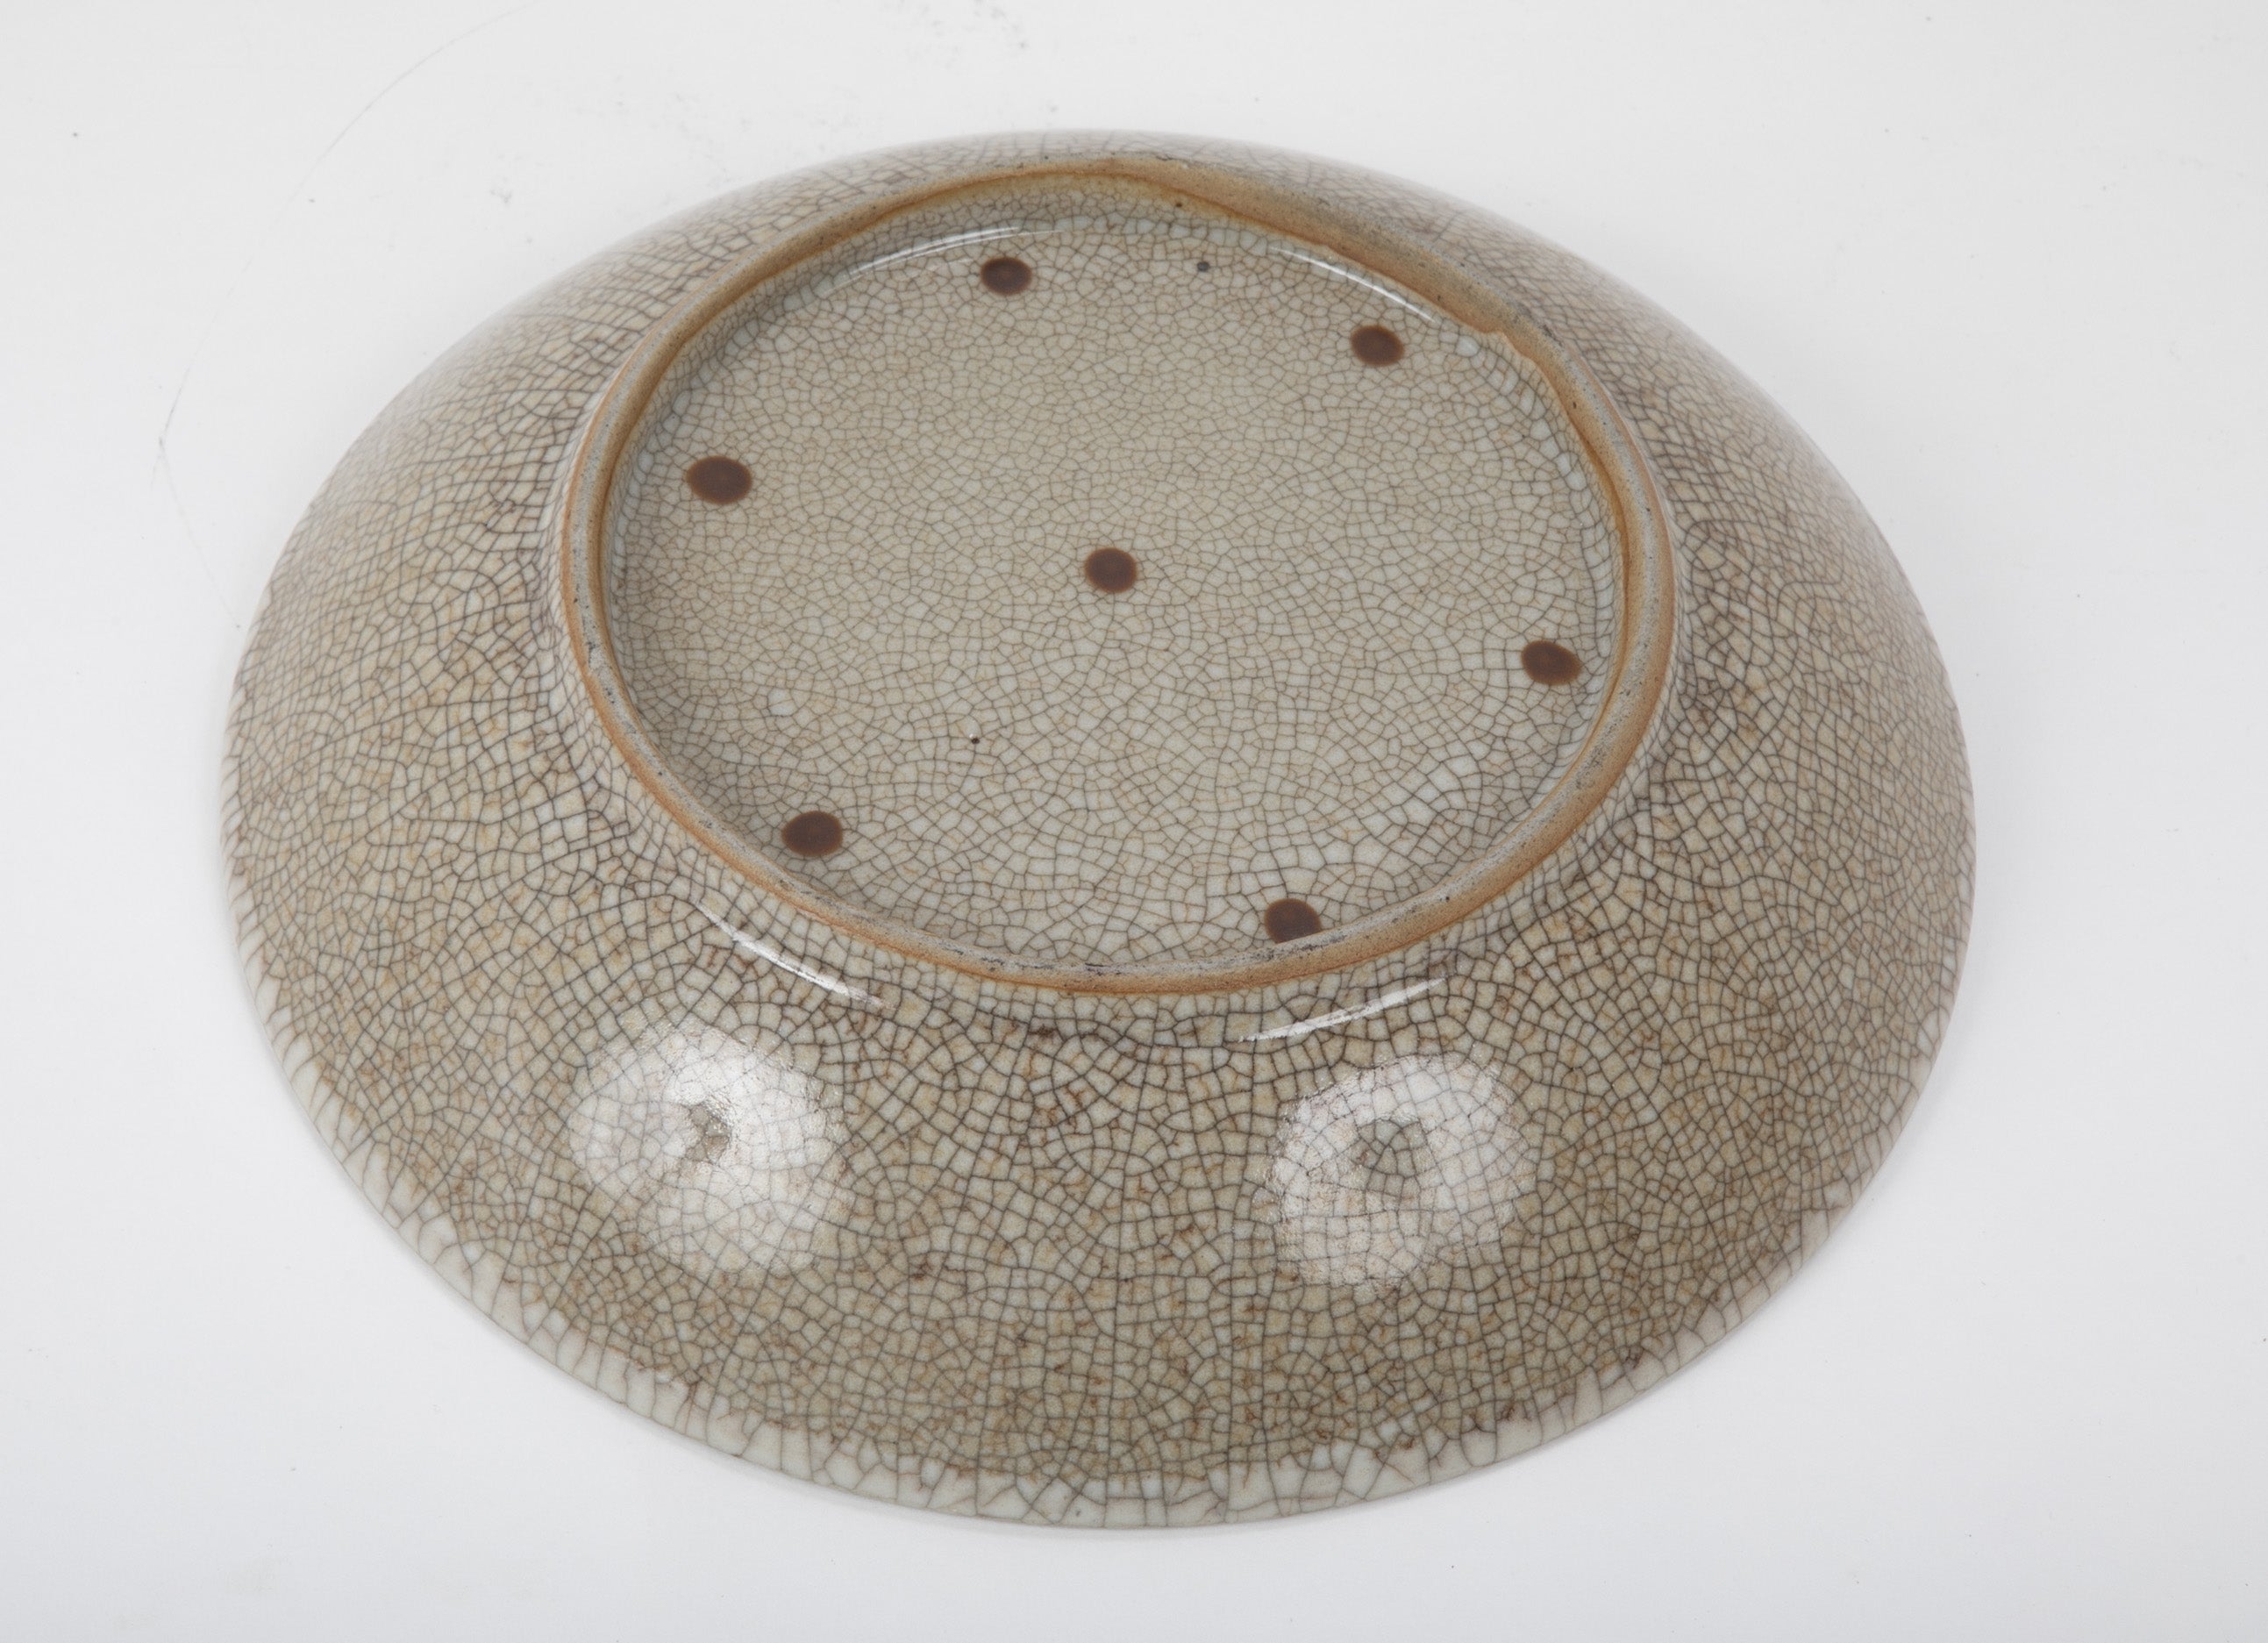 Chinese Crackle Ware Dish